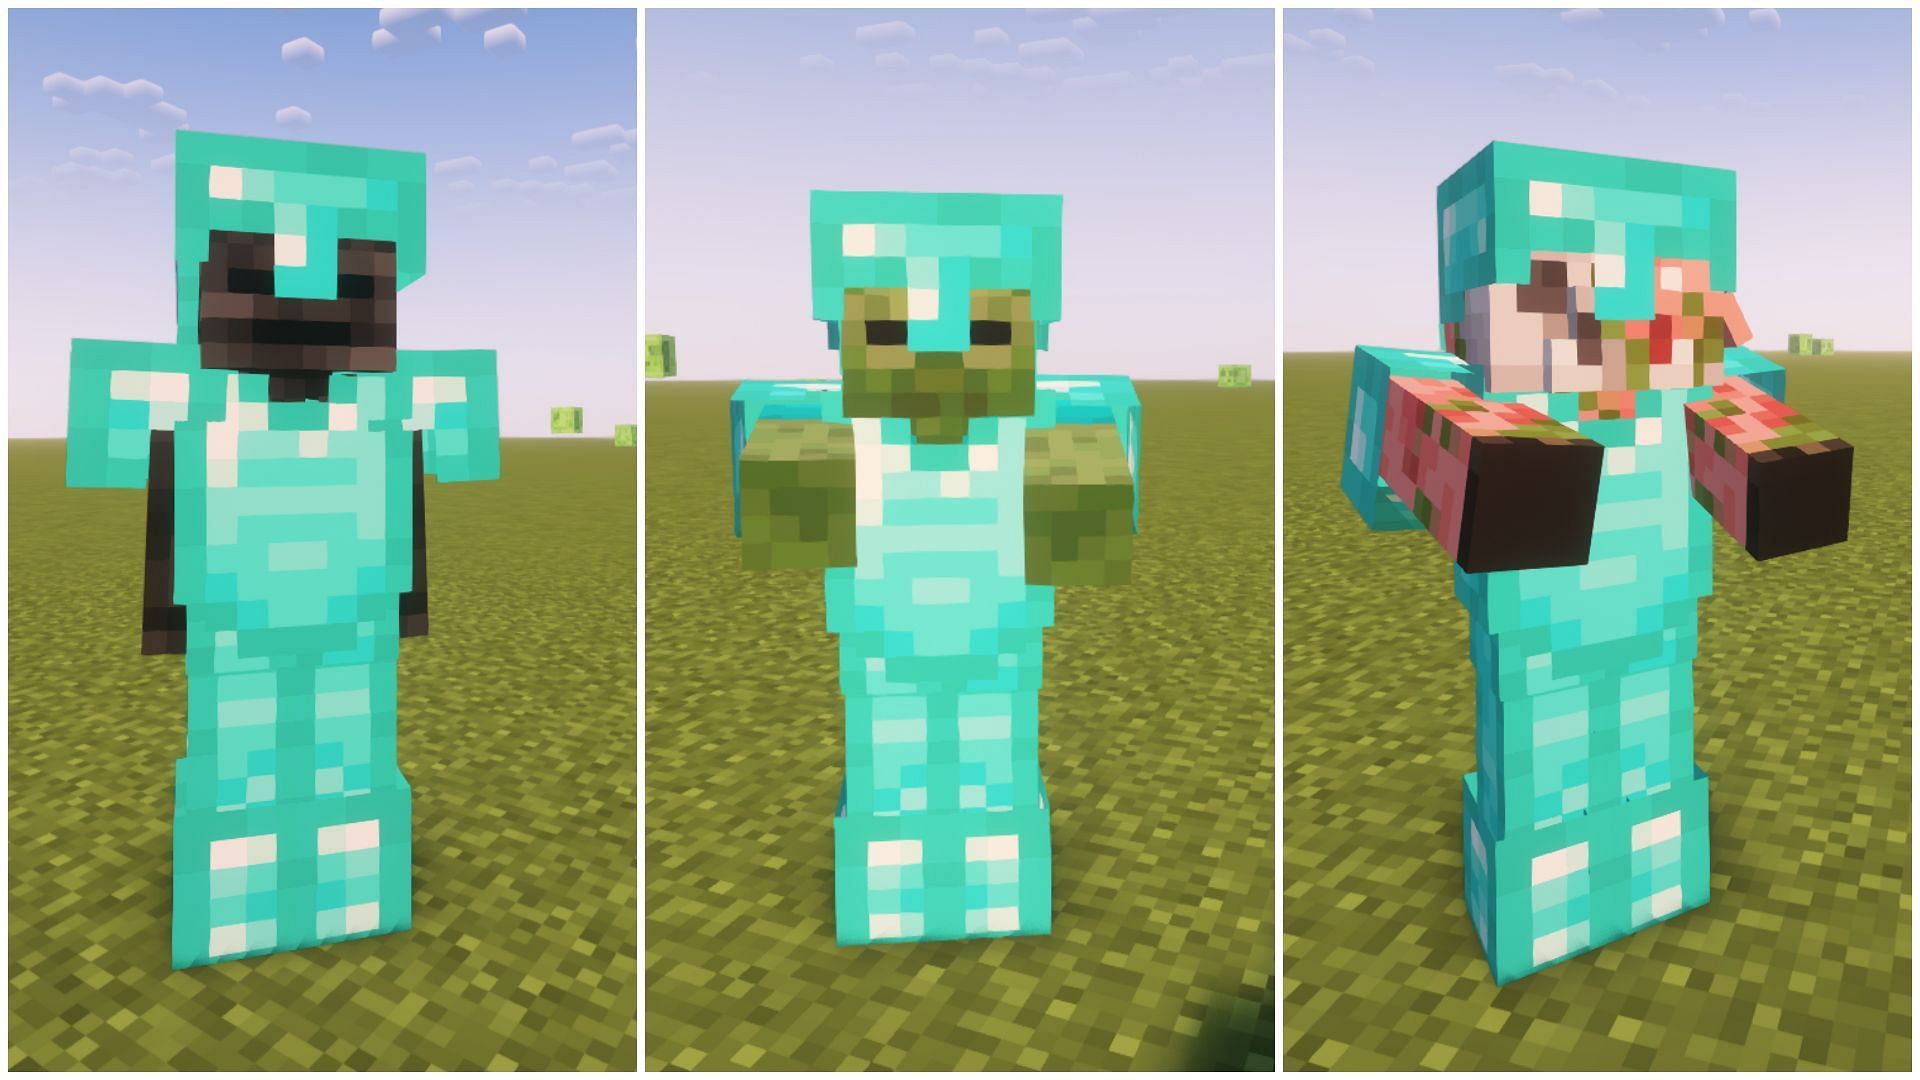 What can you do with unwanted diamond armor in Minecraft? - Quora